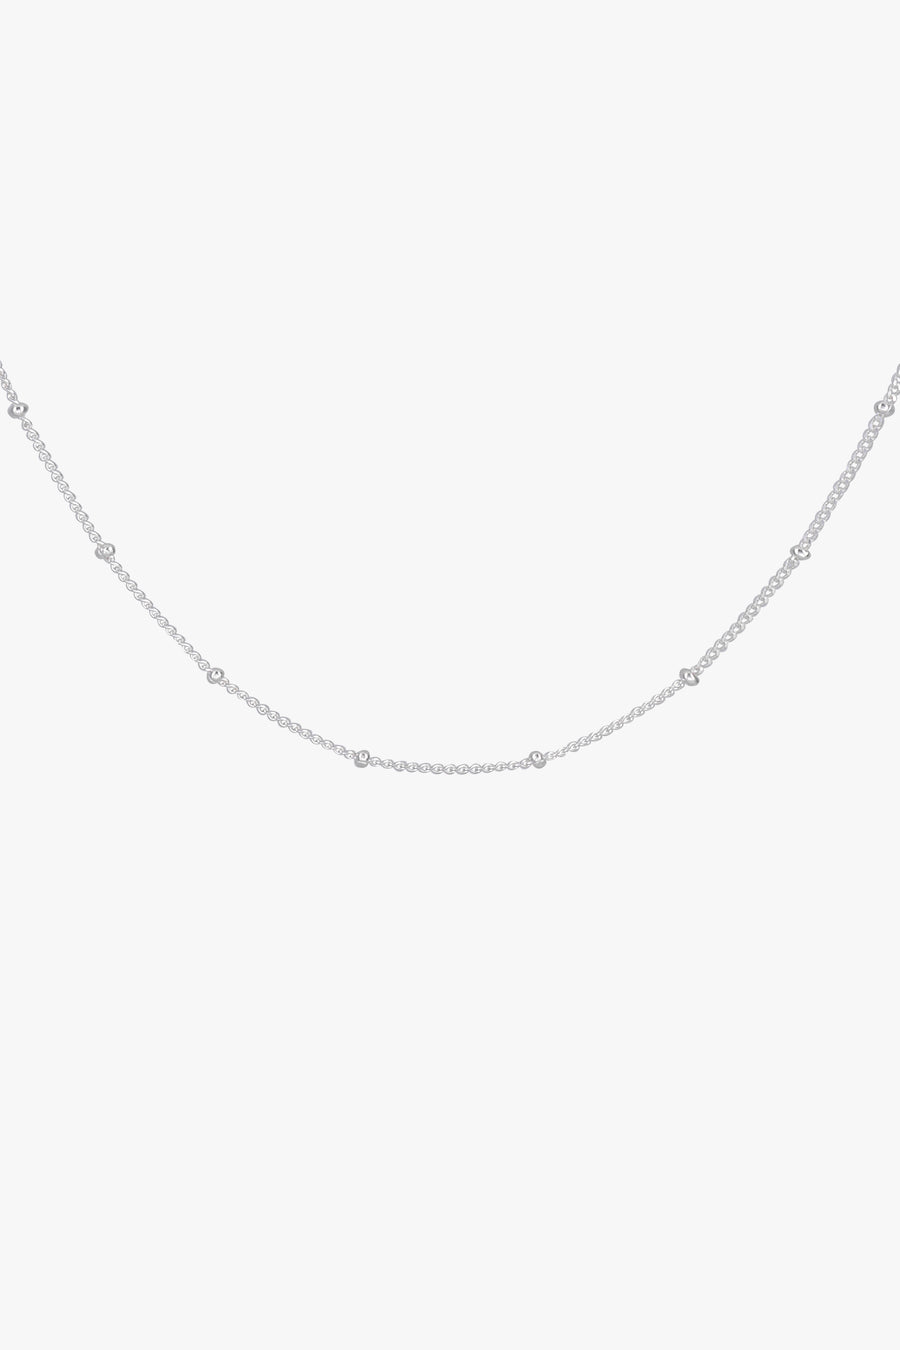 Stud Chain in Silver